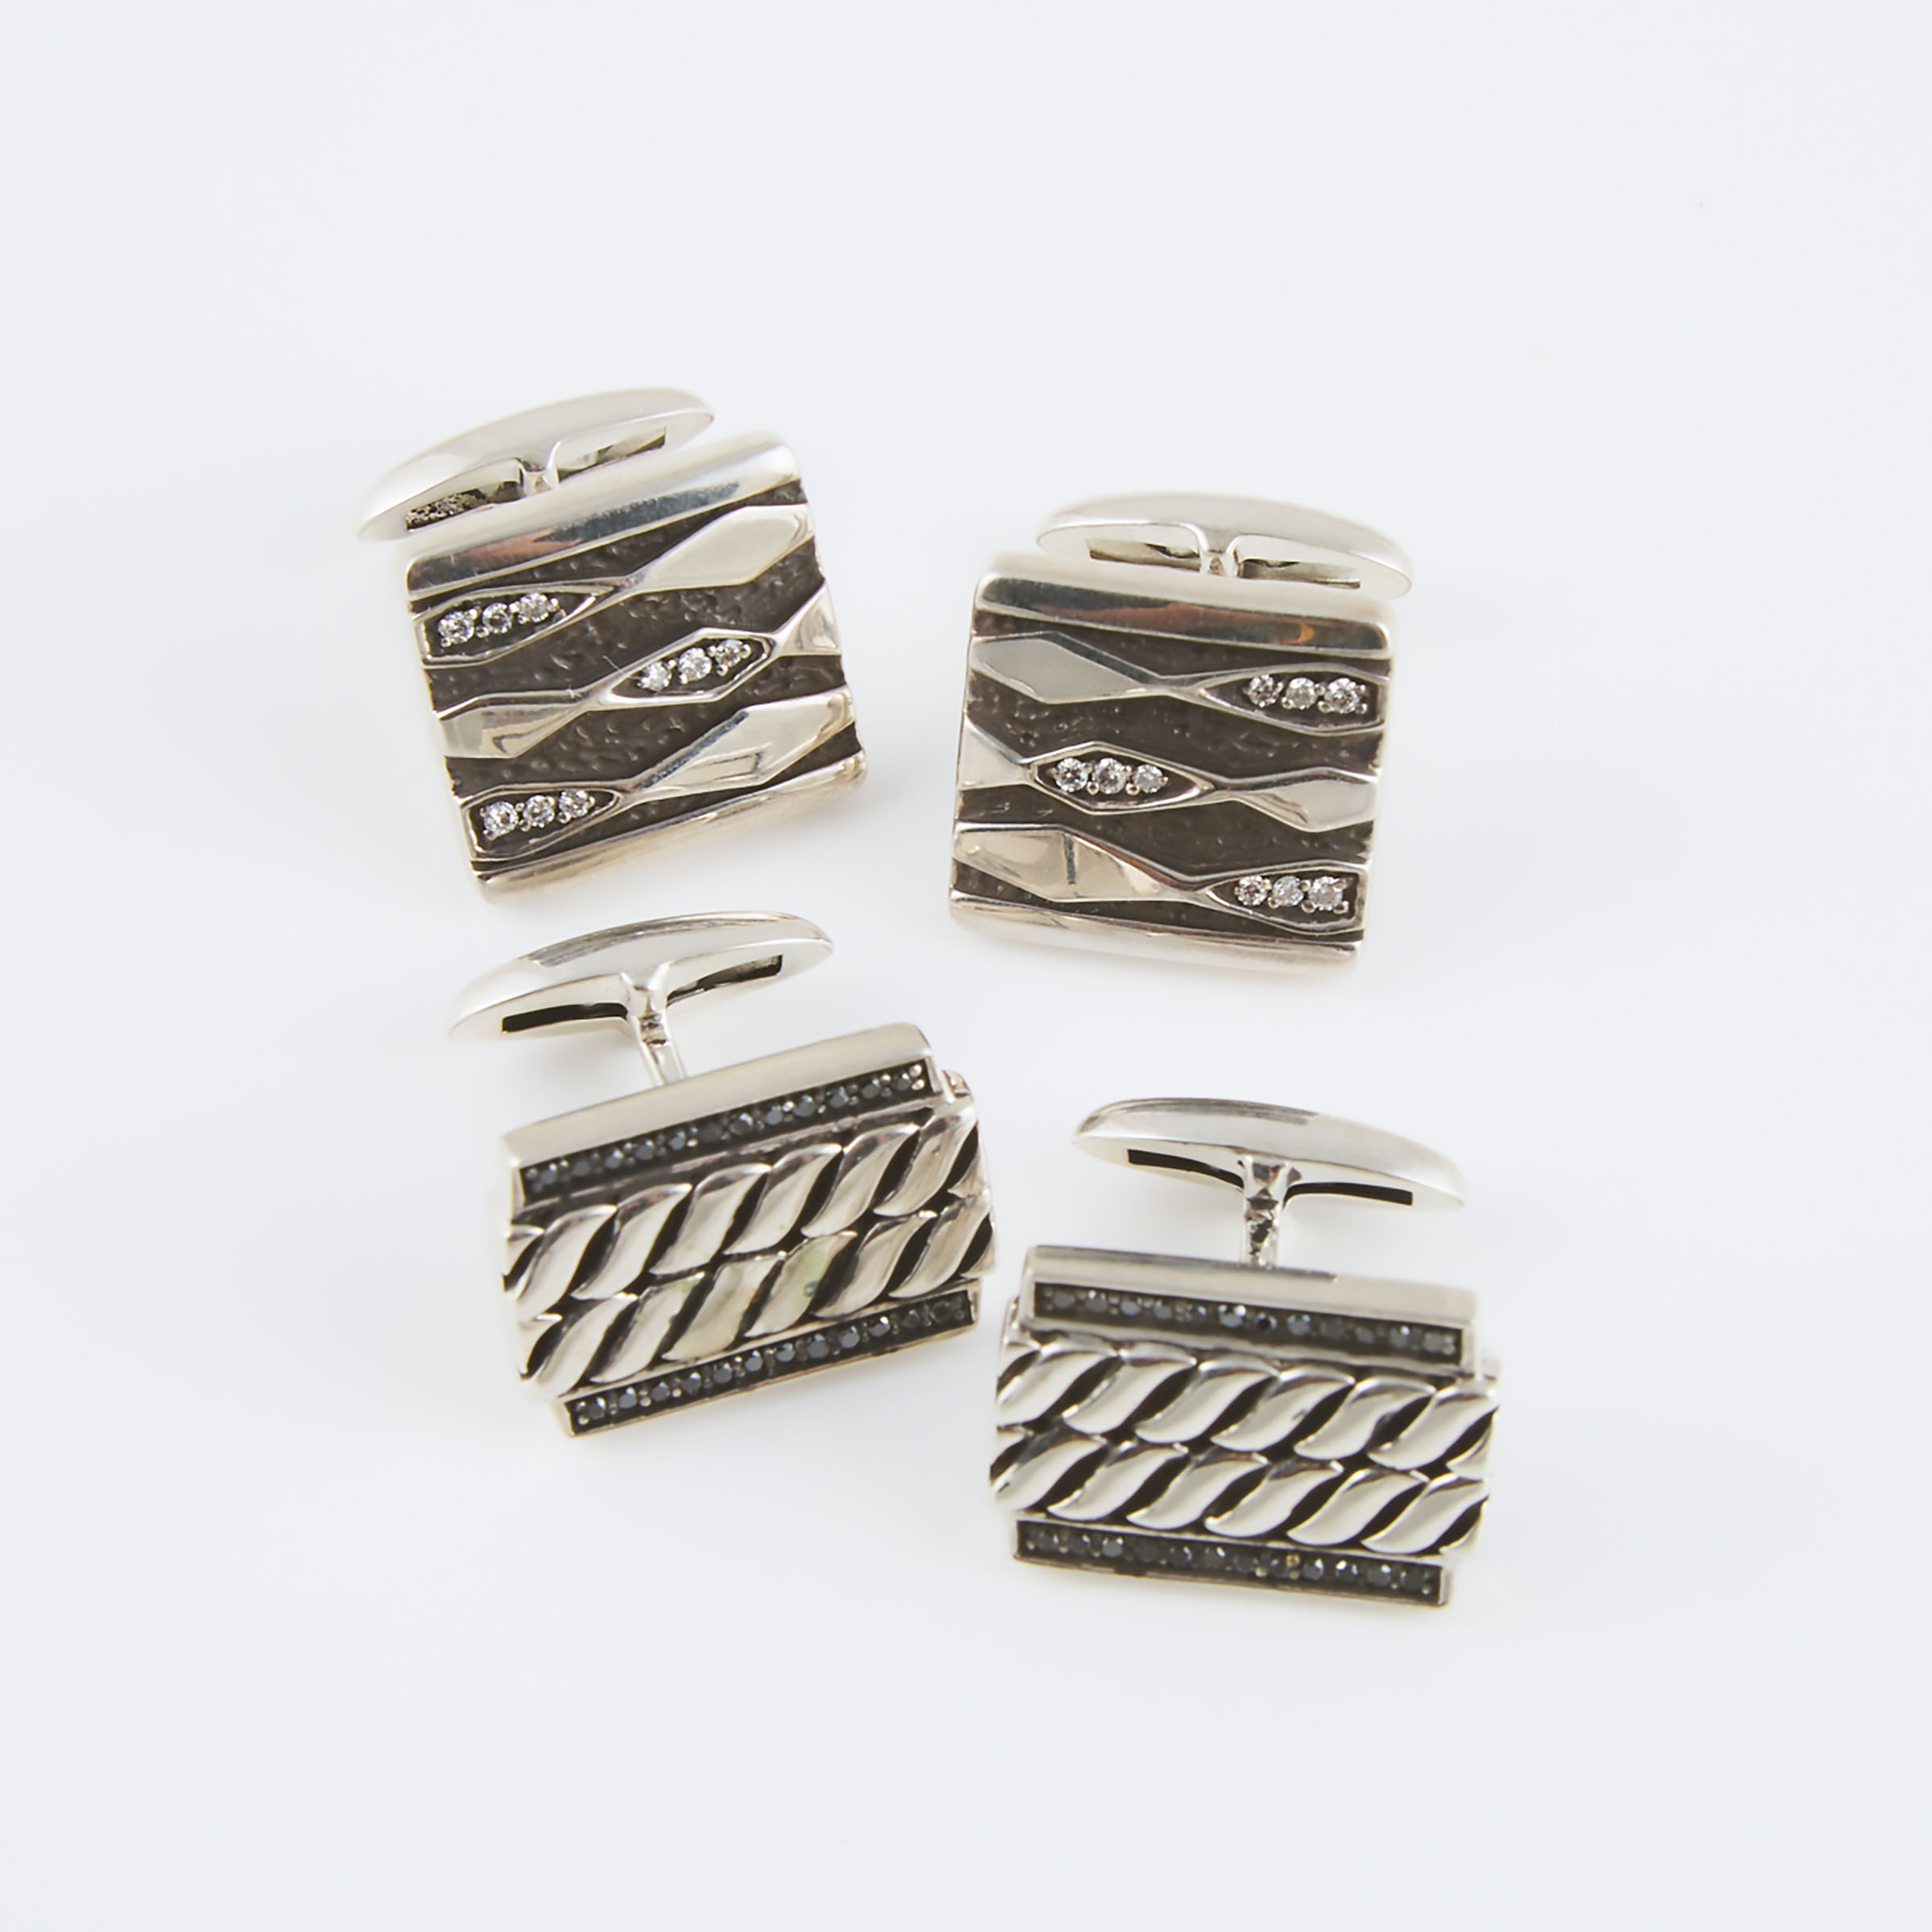 2 Pairs of Sterling Silver Cufflinks